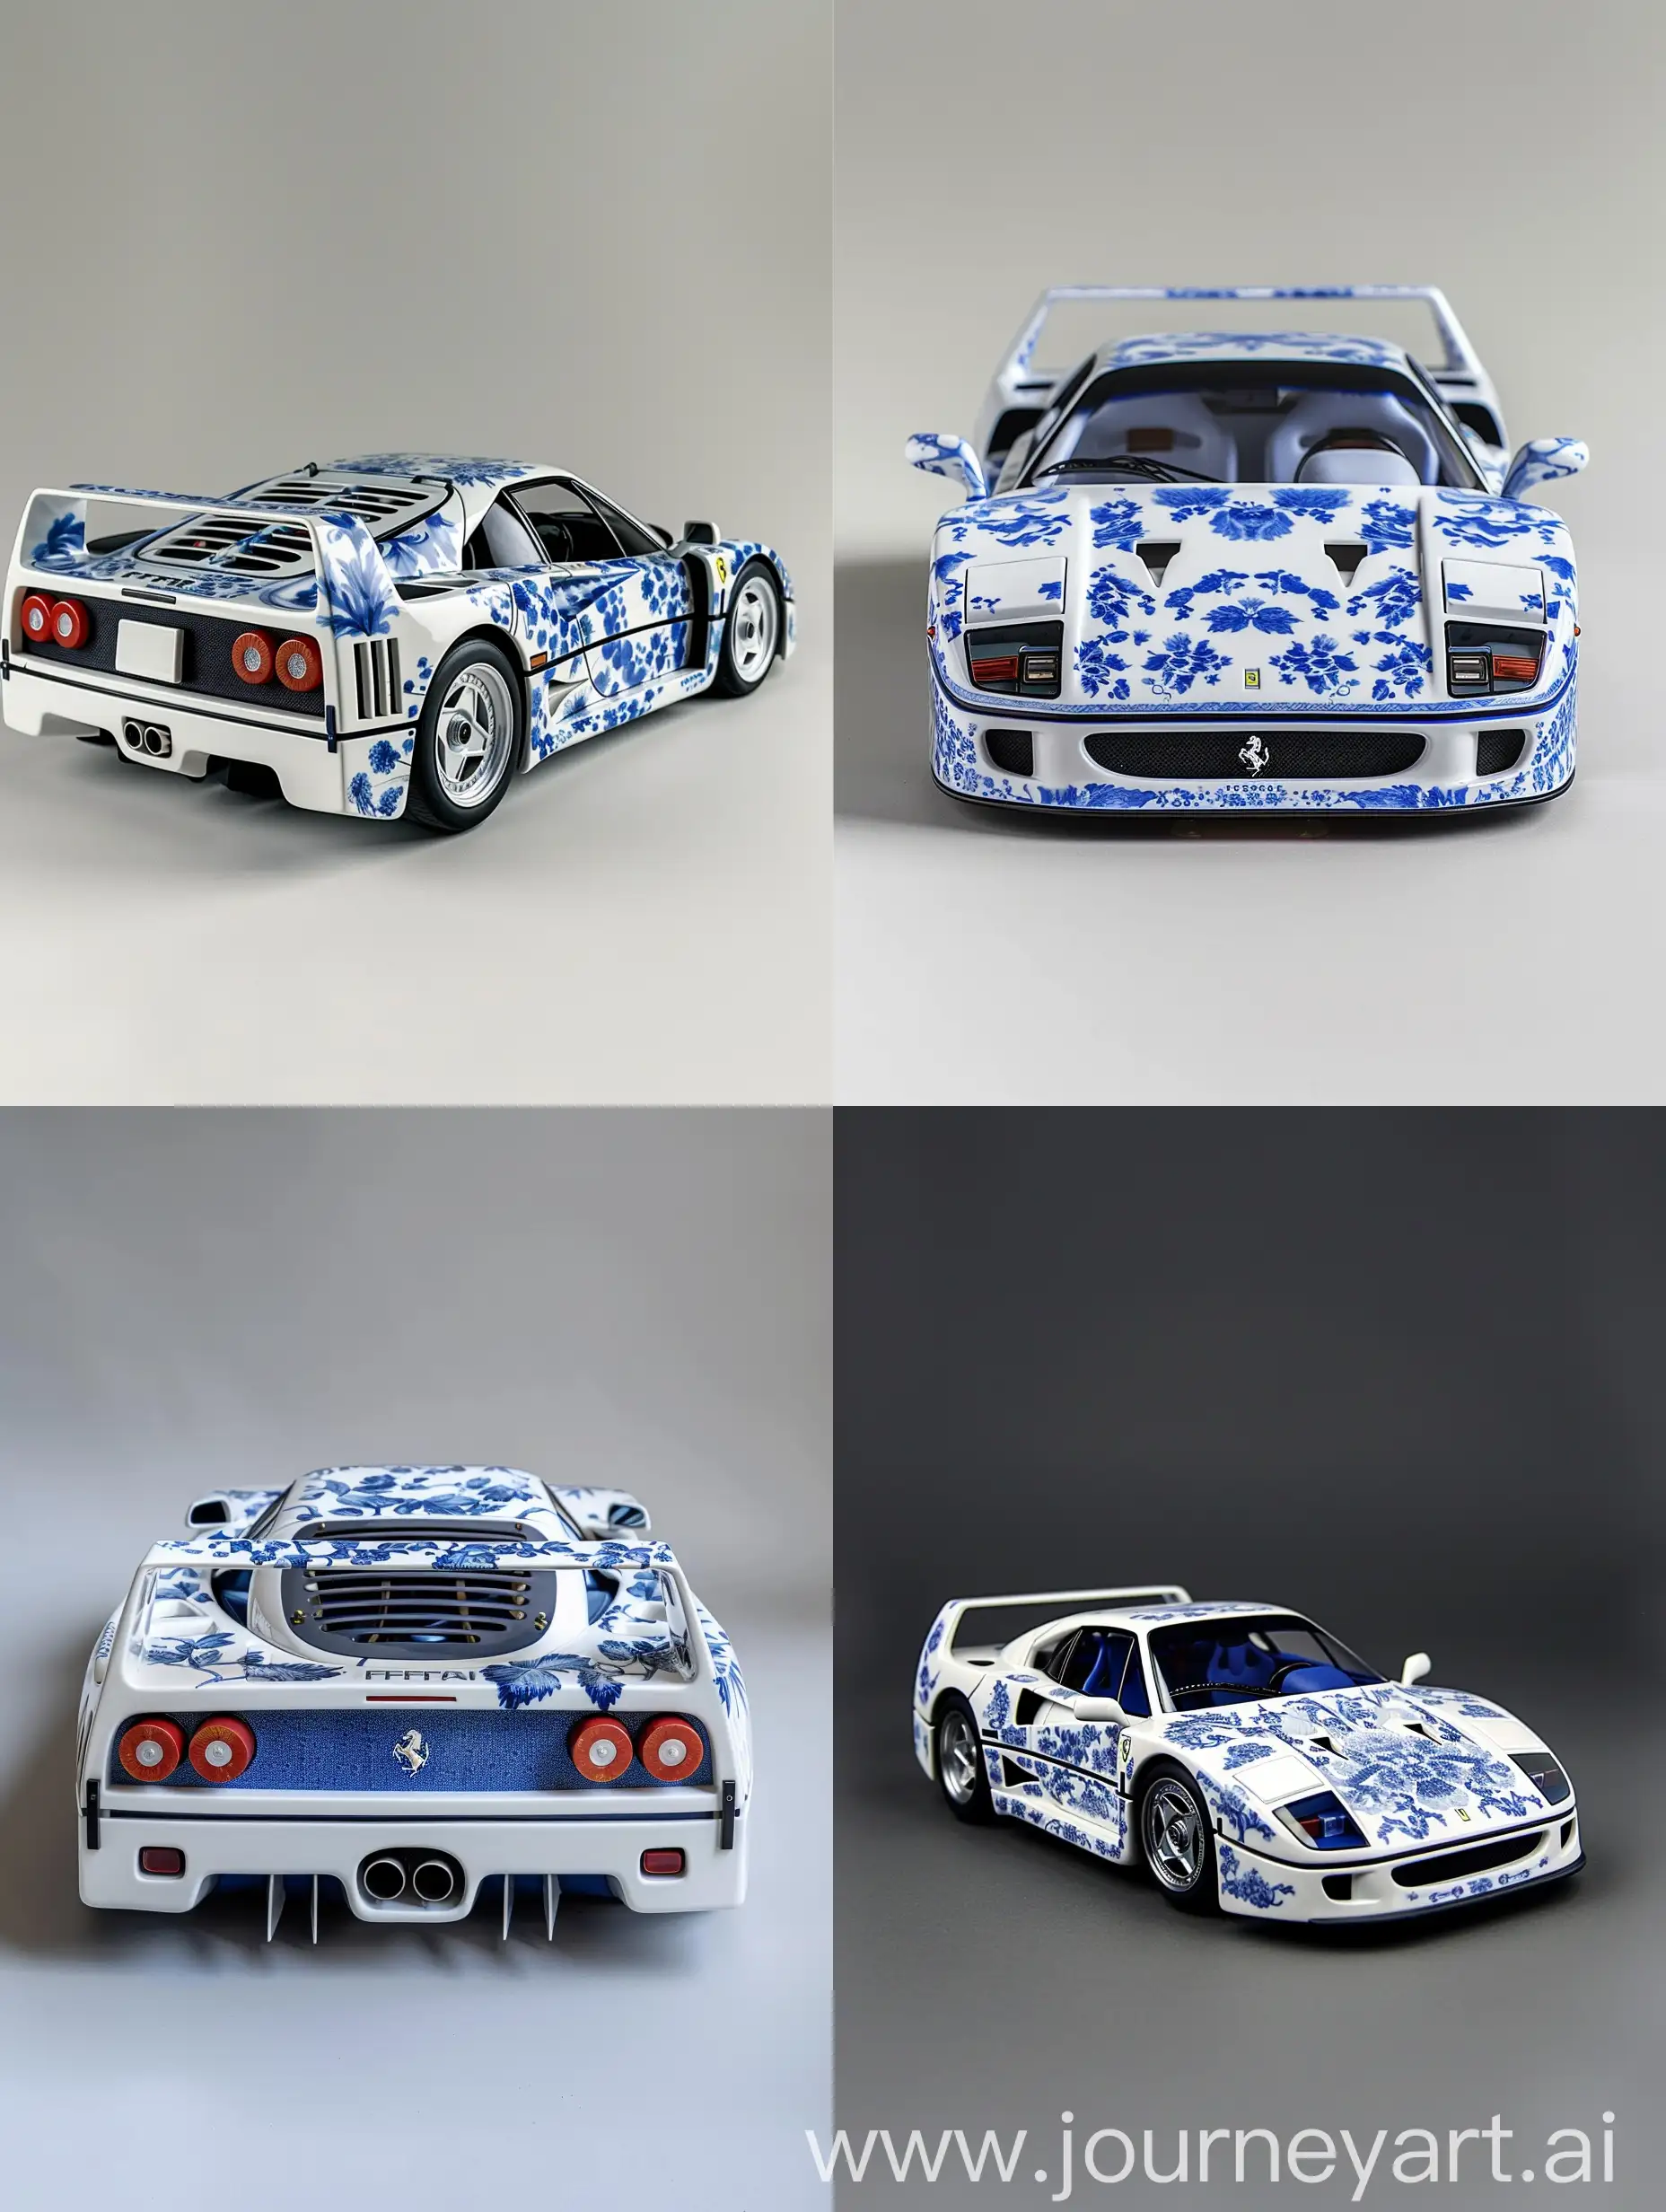 A porcelain Porcelain Ferrari f40, real size sculpture, Imari ware style, featuring delicate blue and white, hyper realistic, 3d